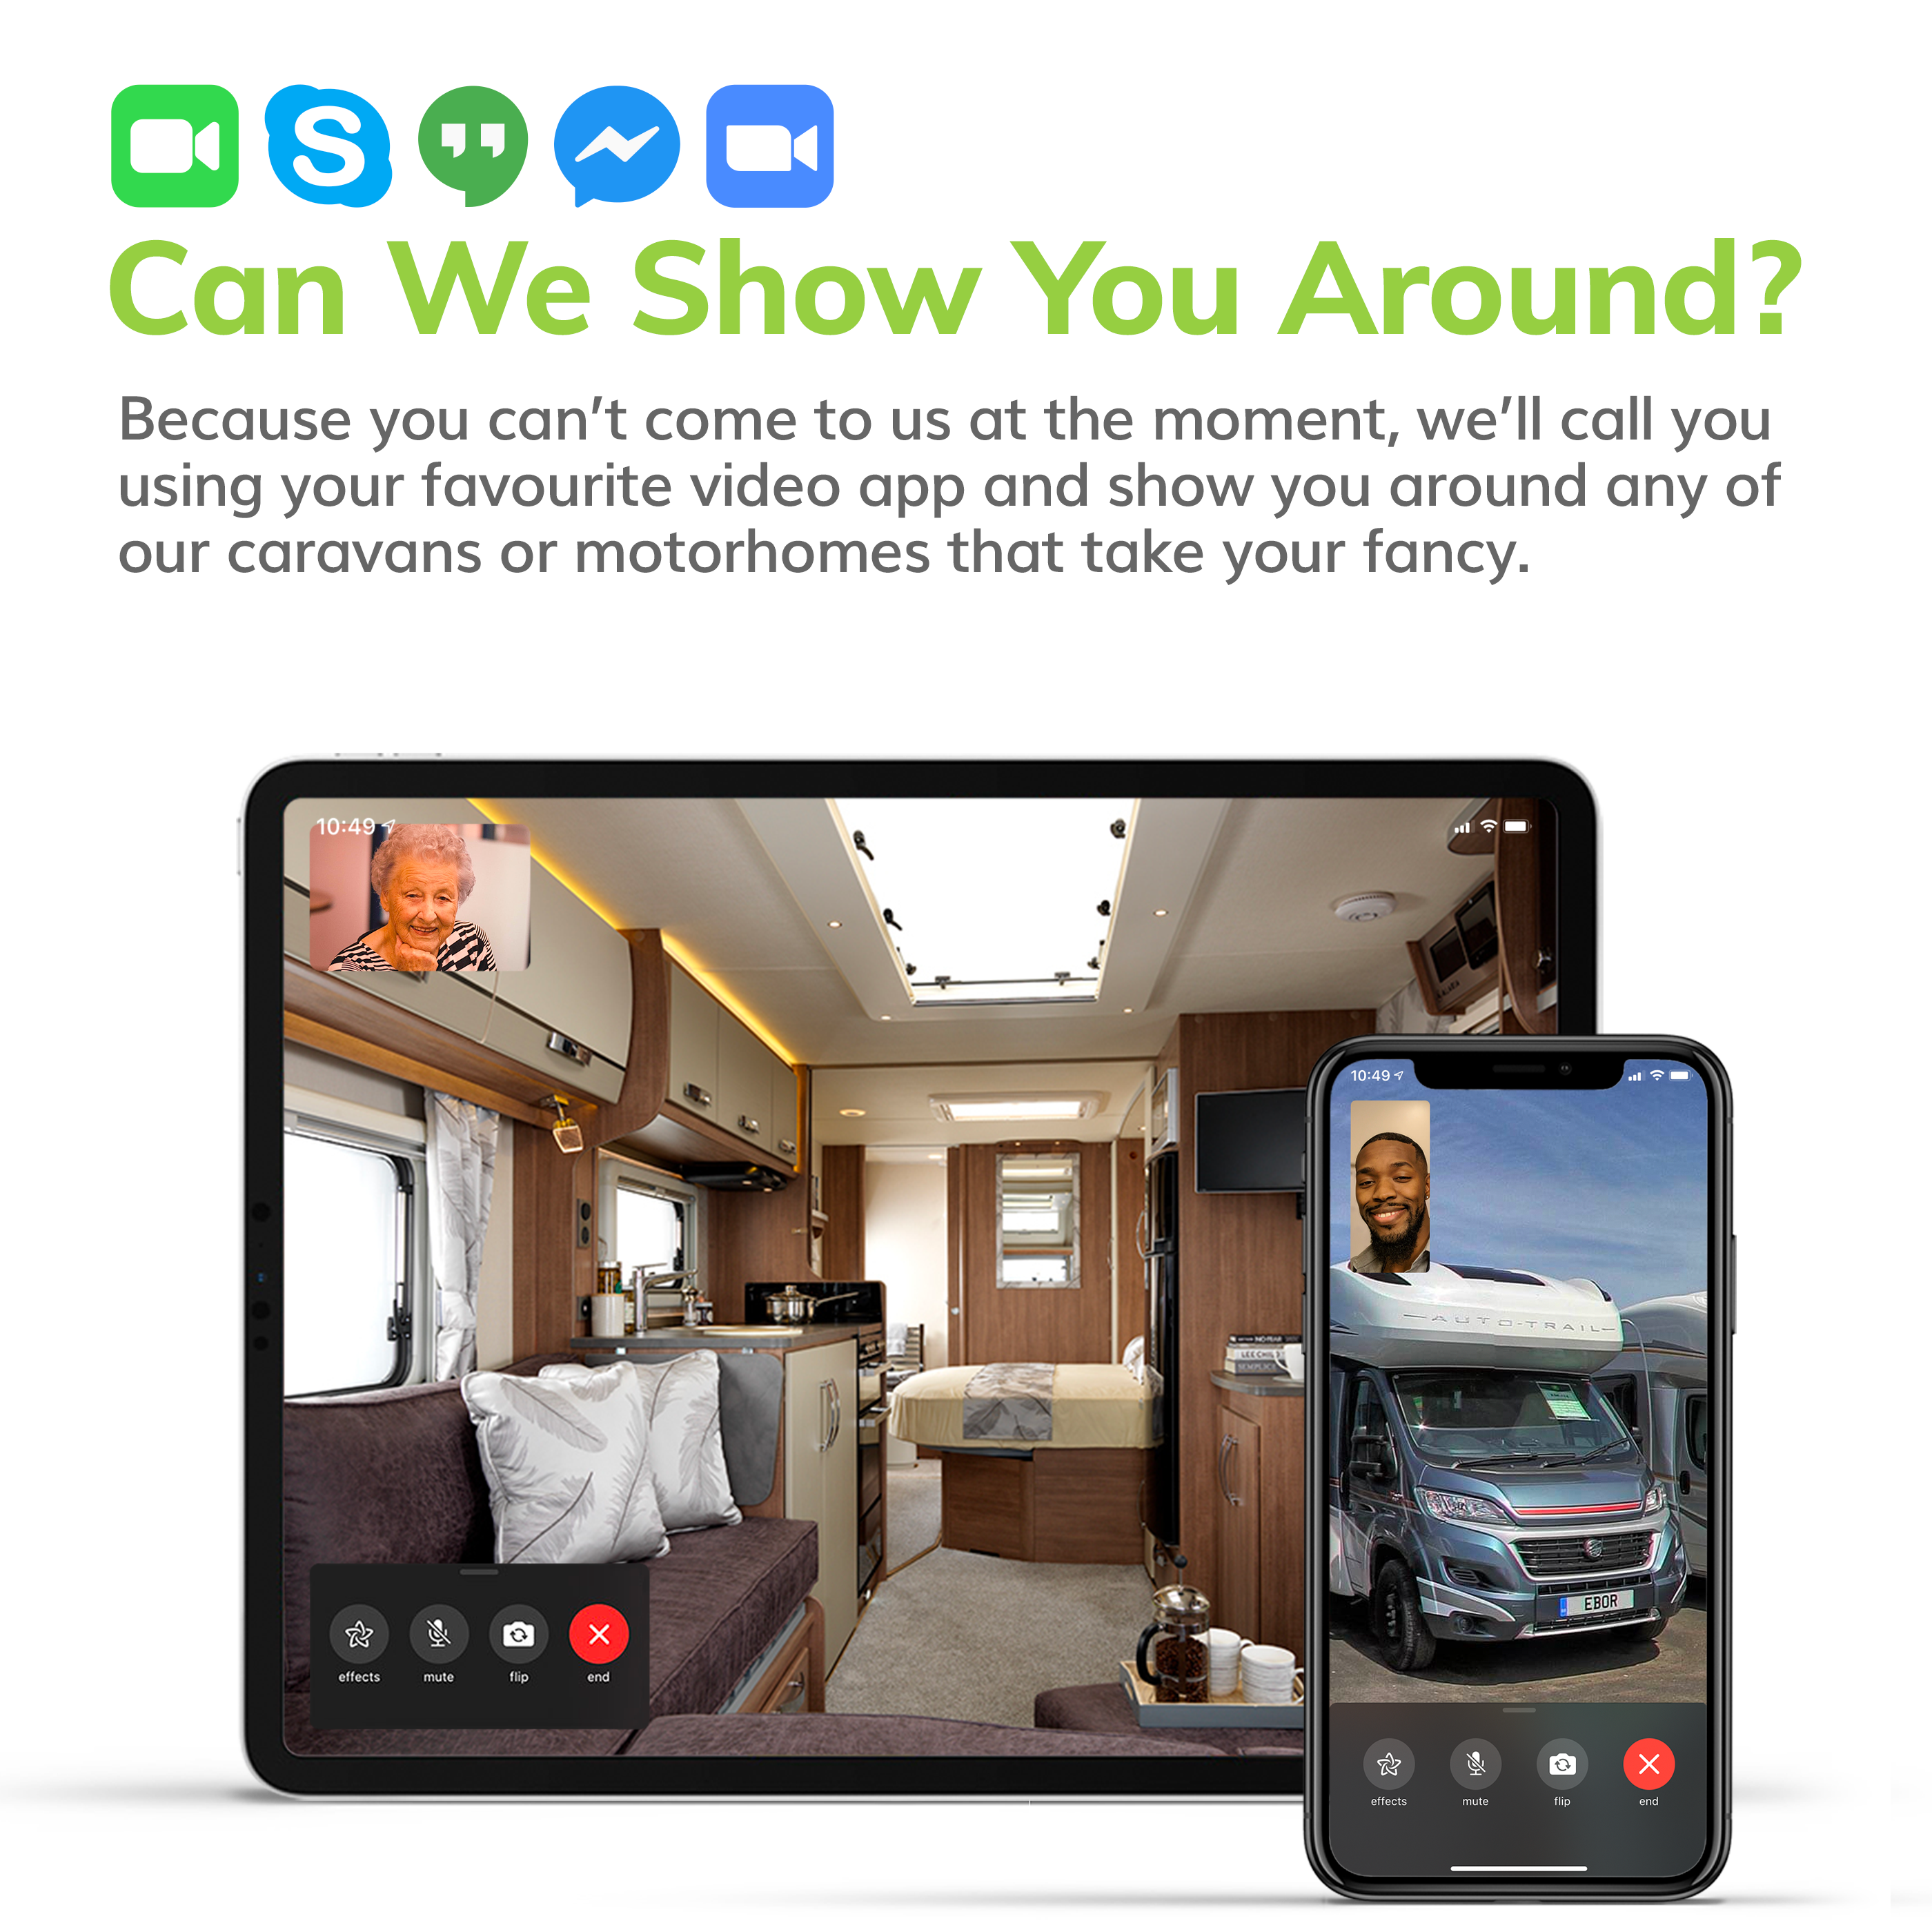 Can We Show You Around? Because you can’t come to us at the moment, we’ll call you using your favourite video app and show you around any of our caravans or motorhomes that take your fancy.